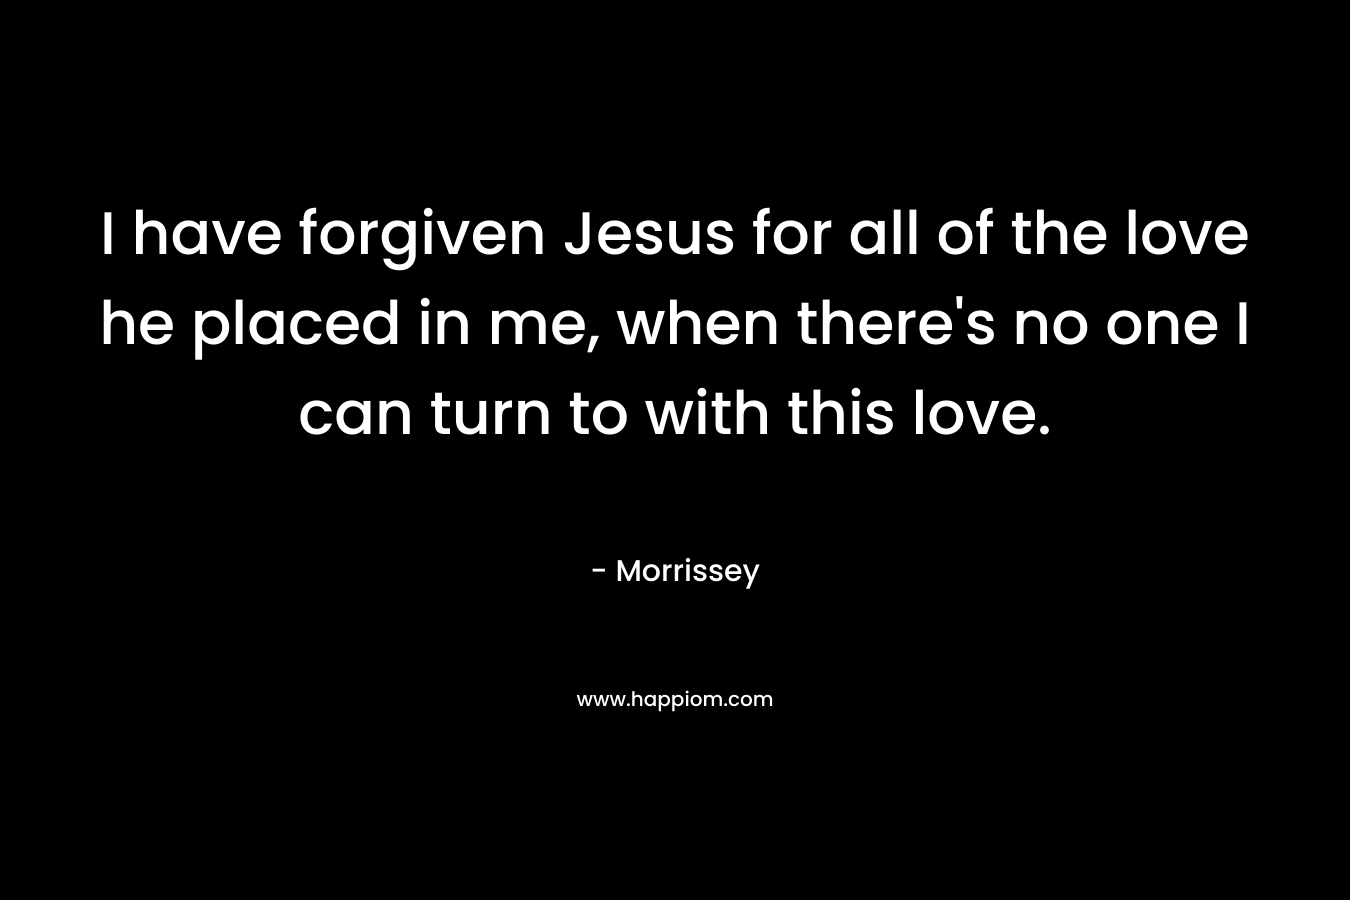 I have forgiven Jesus for all of the love he placed in me, when there's no one I can turn to with this love.